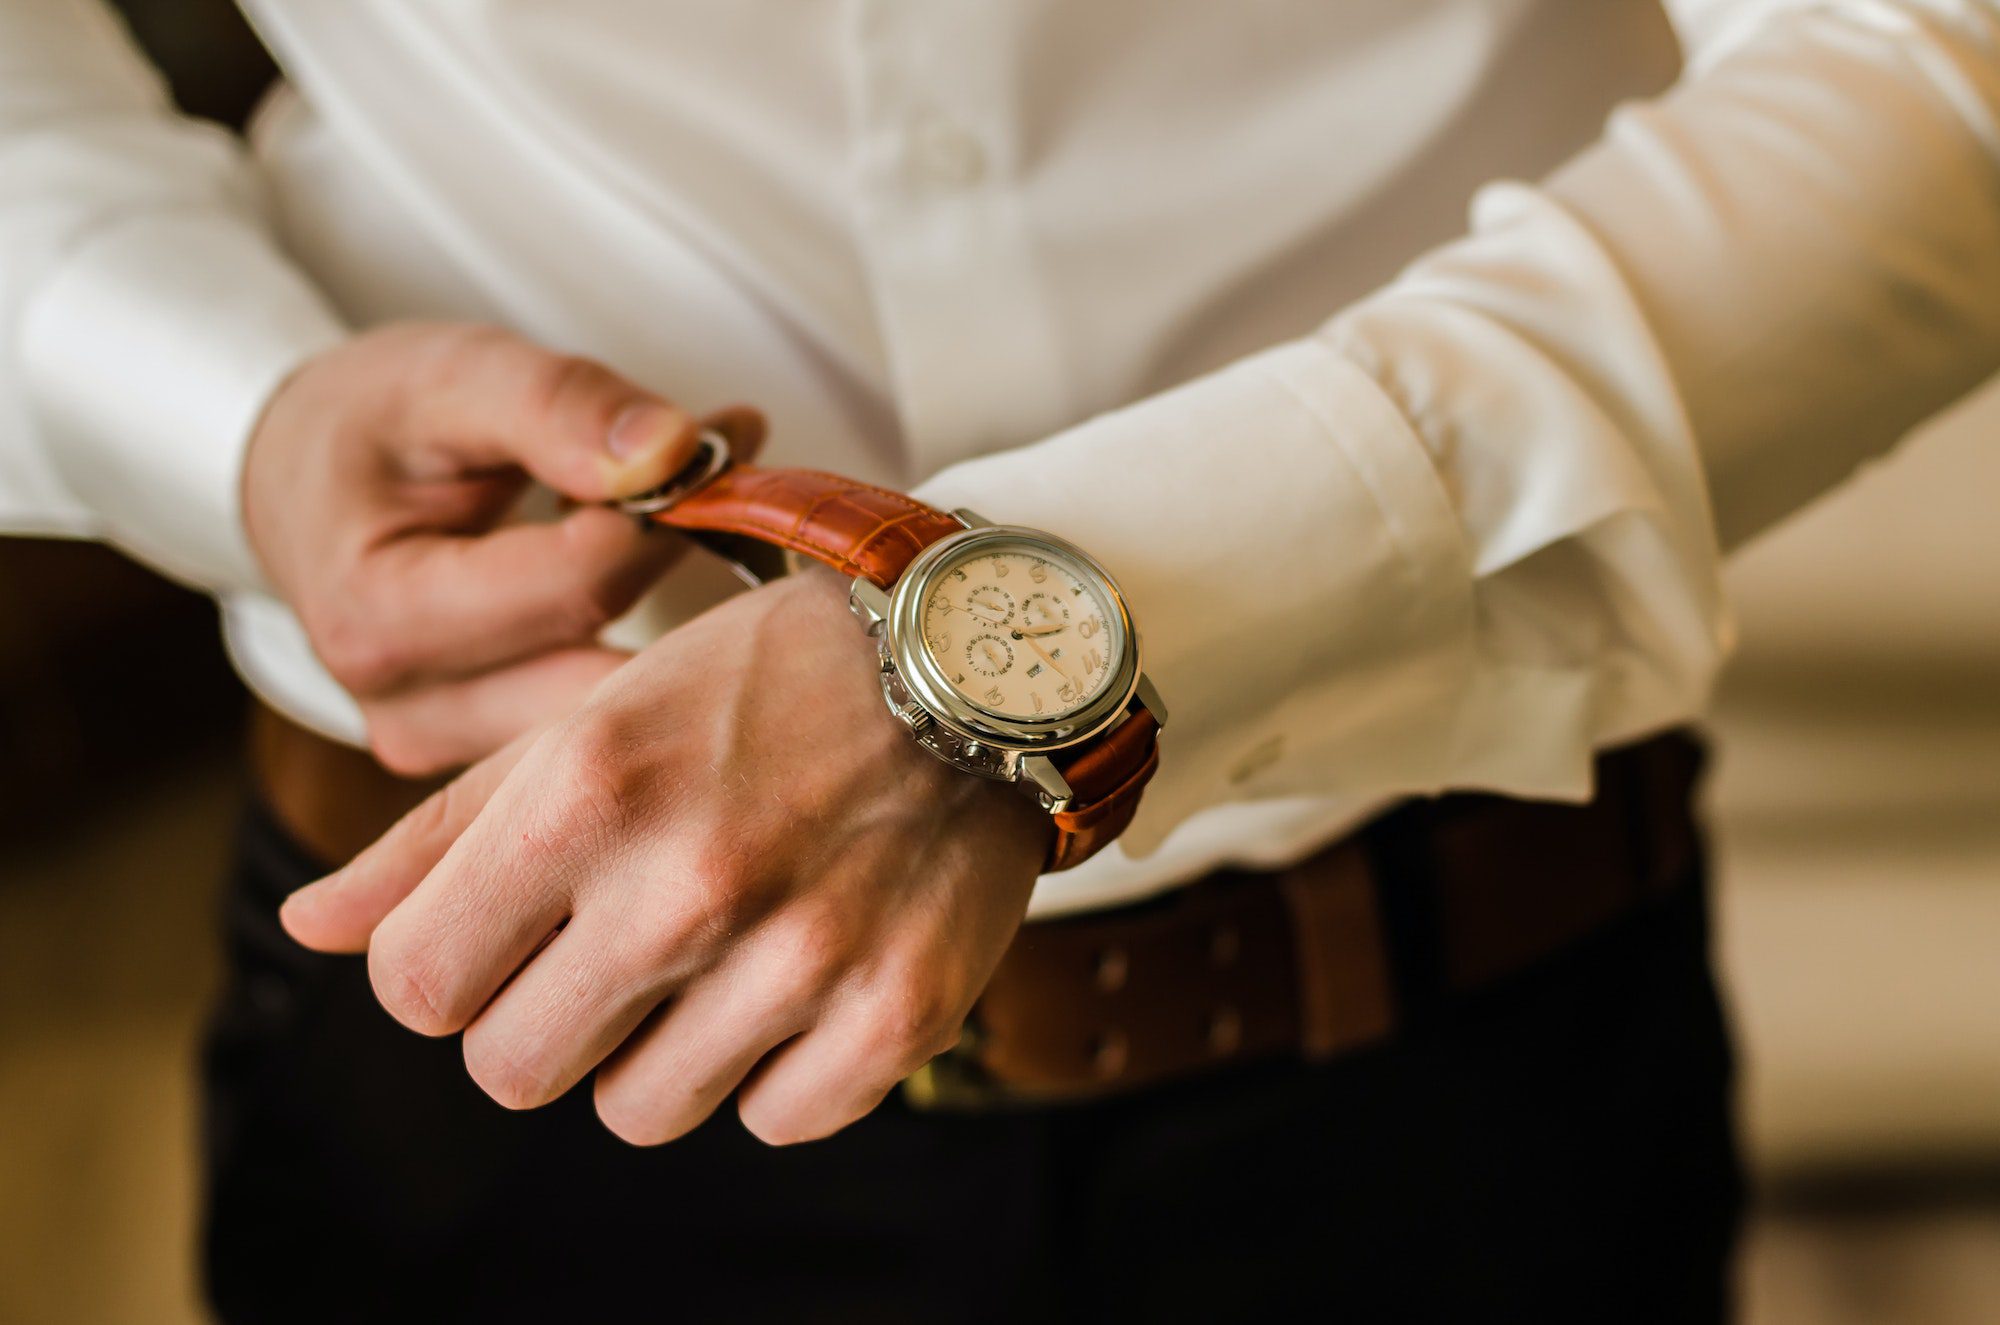 Affordable Luxury: Top Watch Brands for Men Under $200